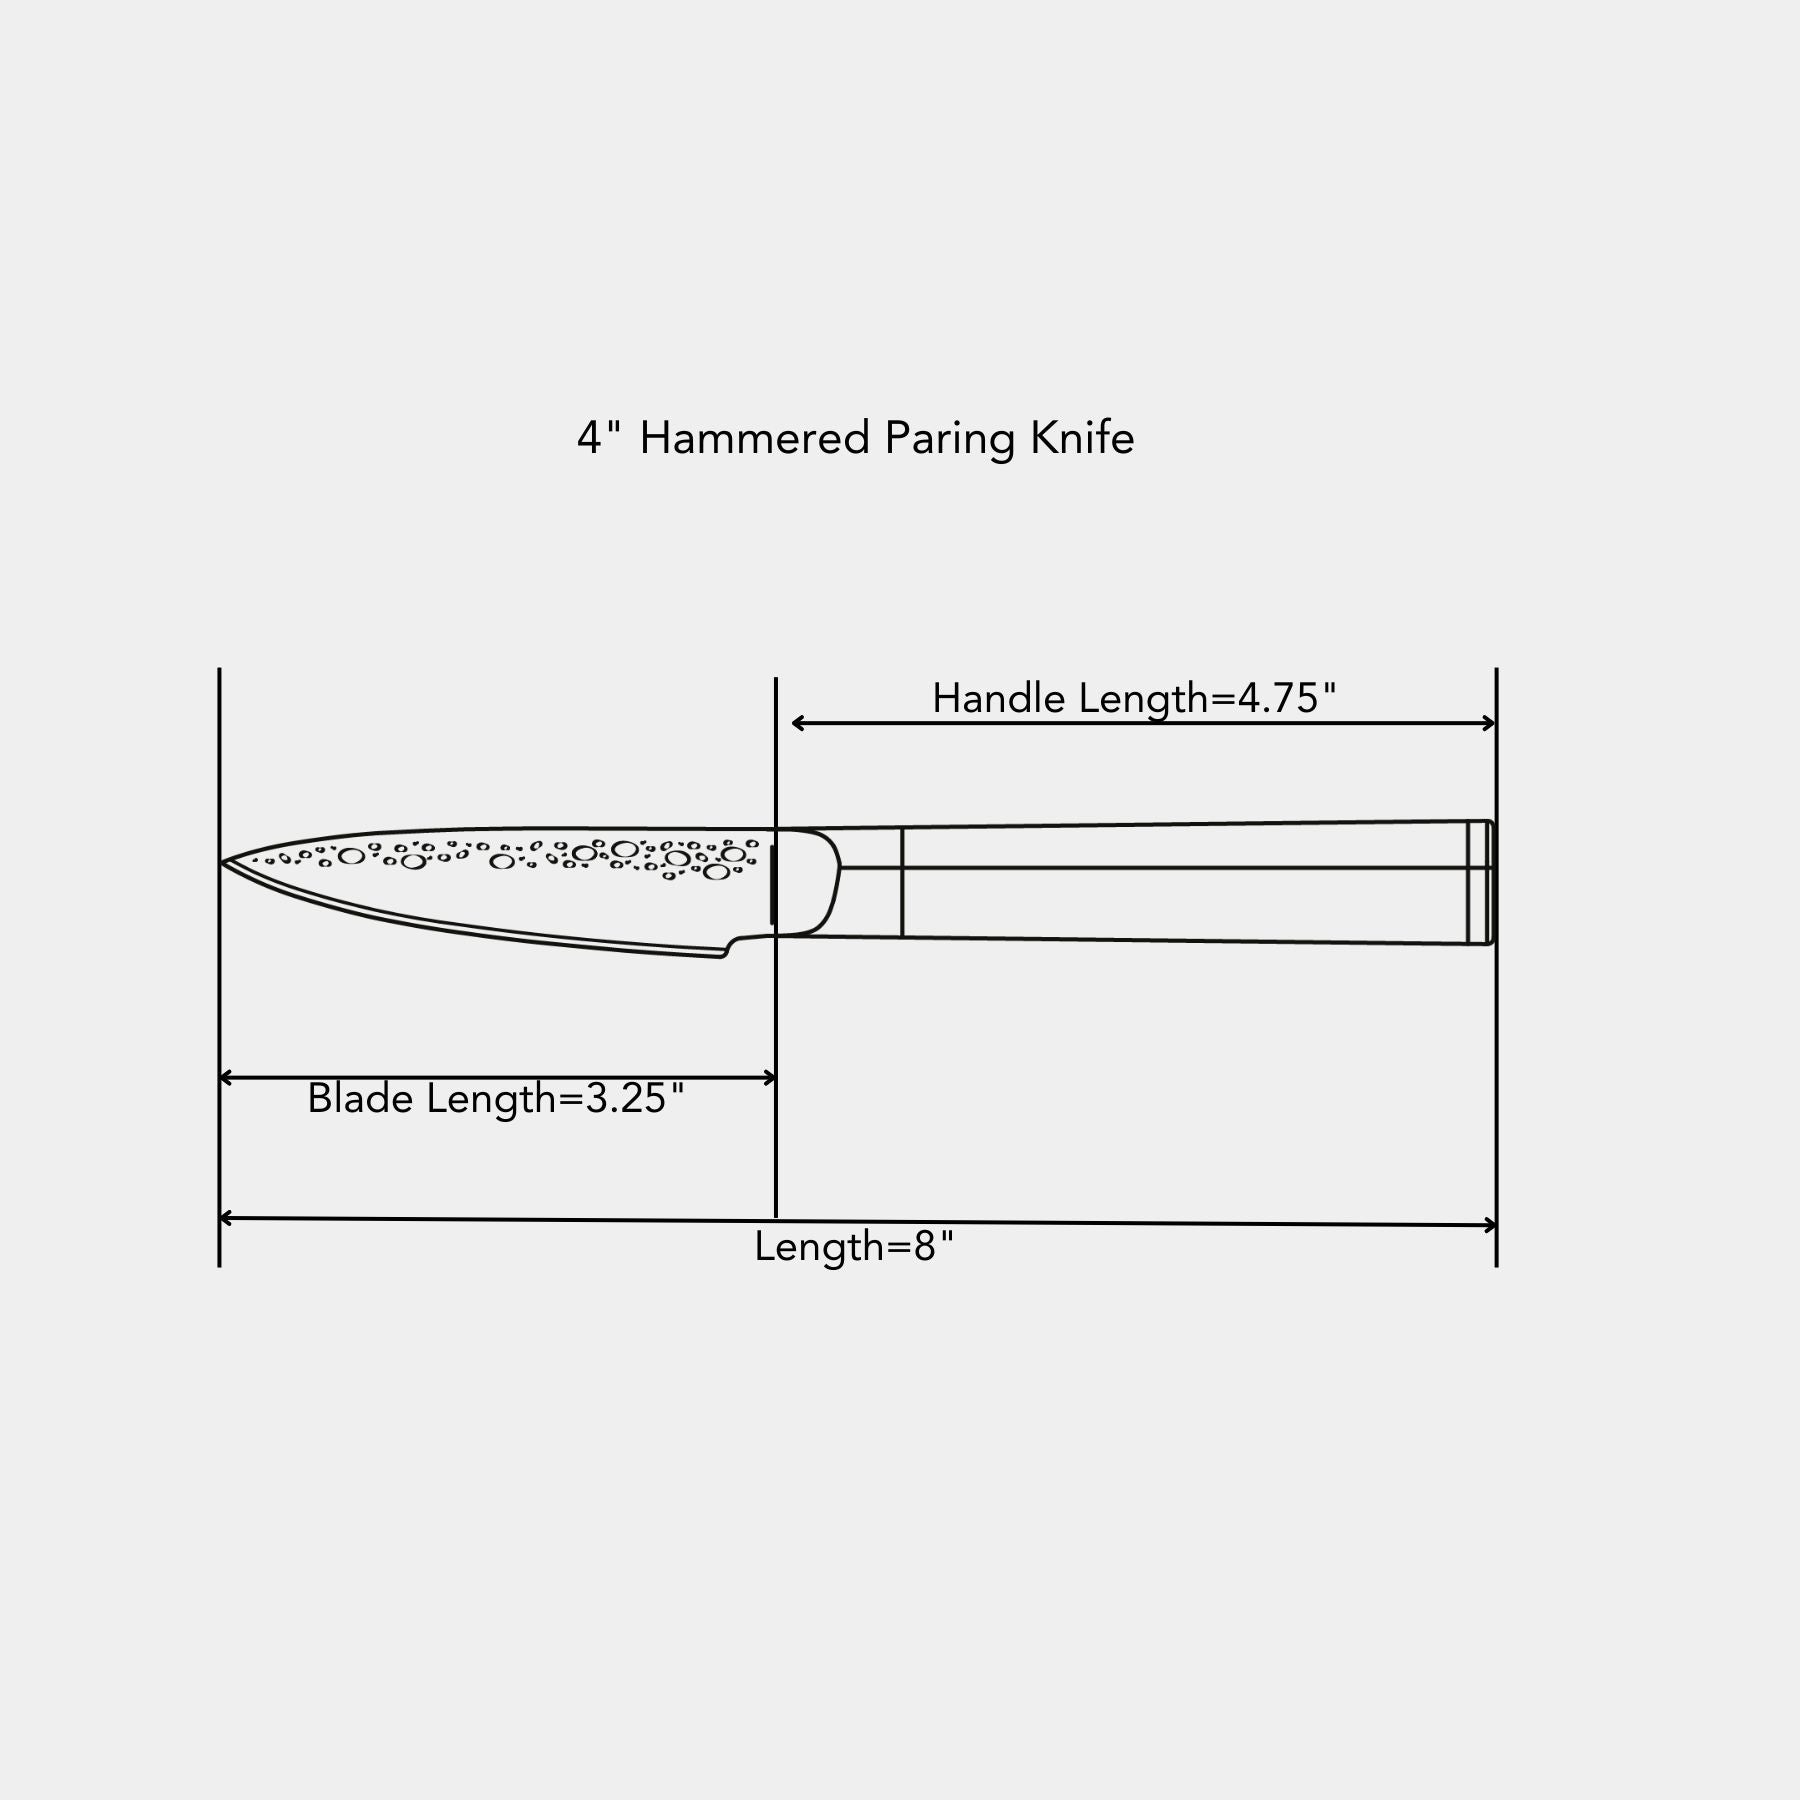 4" Hammered Paring Knife Dimensions  of blade and handle length